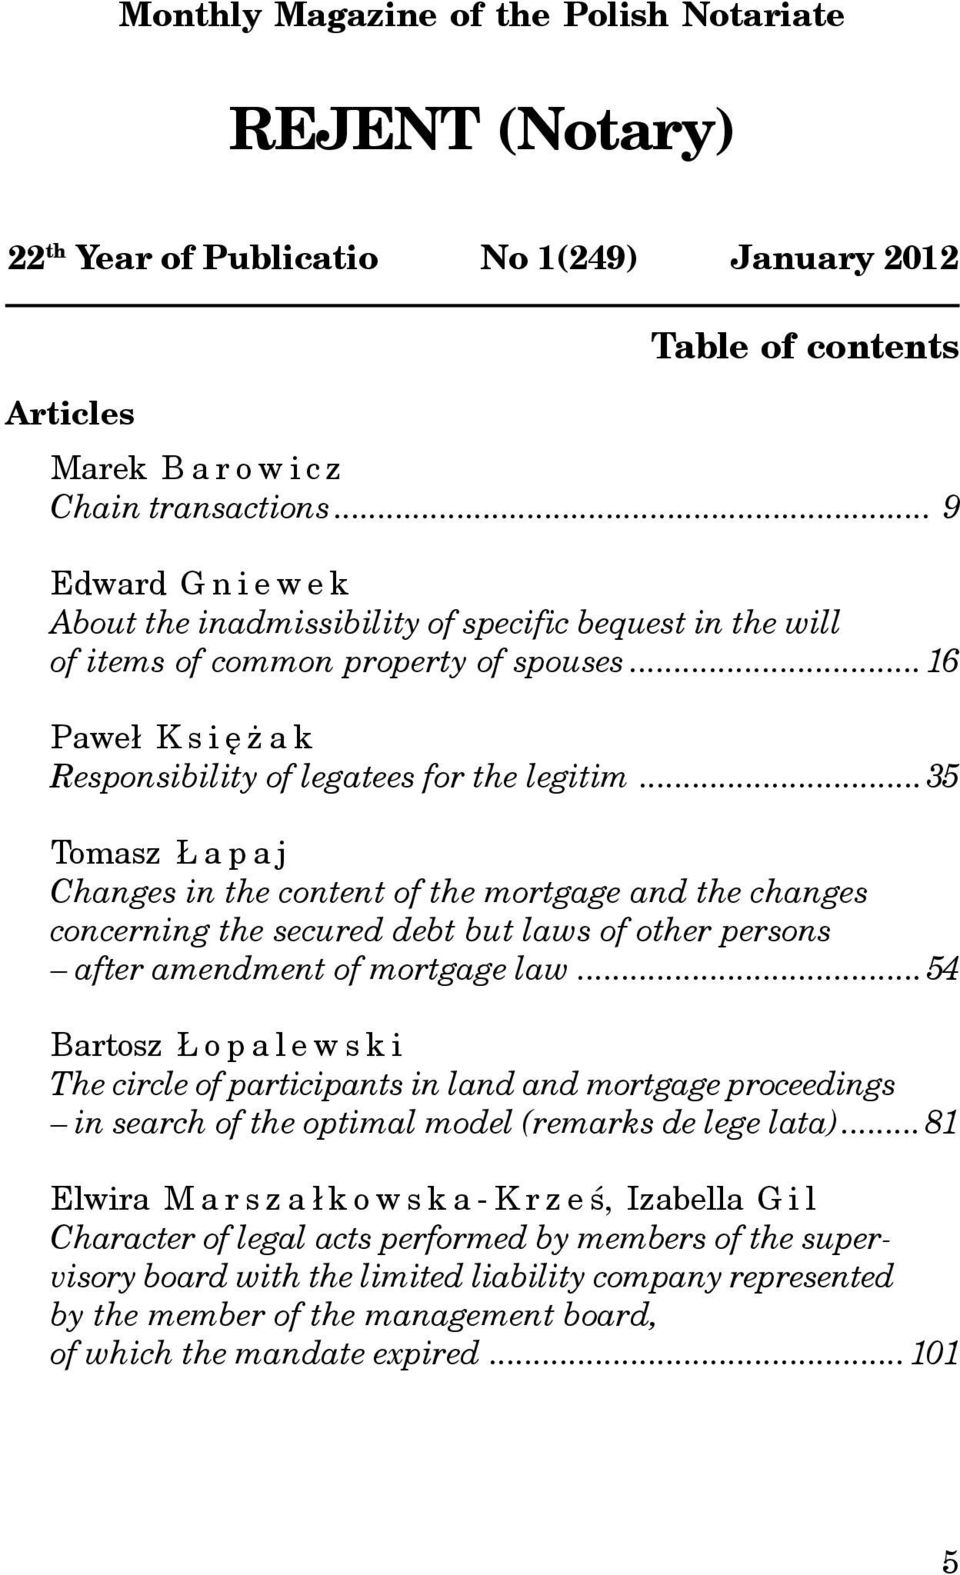 .. 35 Tomasz apaj Changes in the content of the mortgage and the changes concerning the secured debt but laws of other persons after amendment of mortgage law.